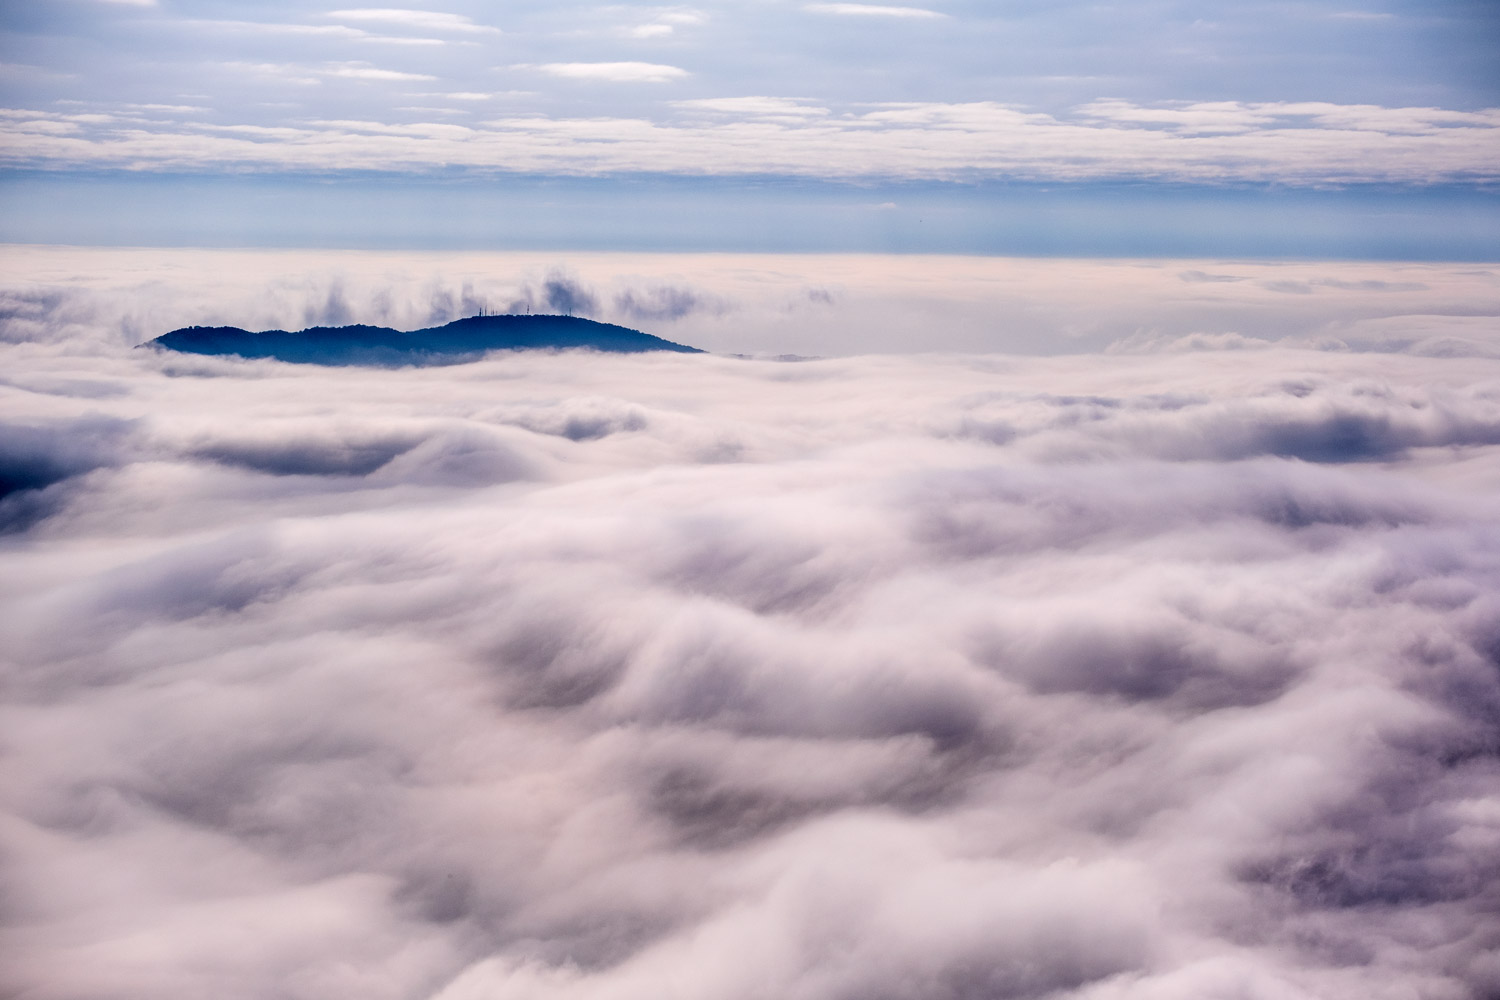 Sea of clouds with island under Mount Baldo...